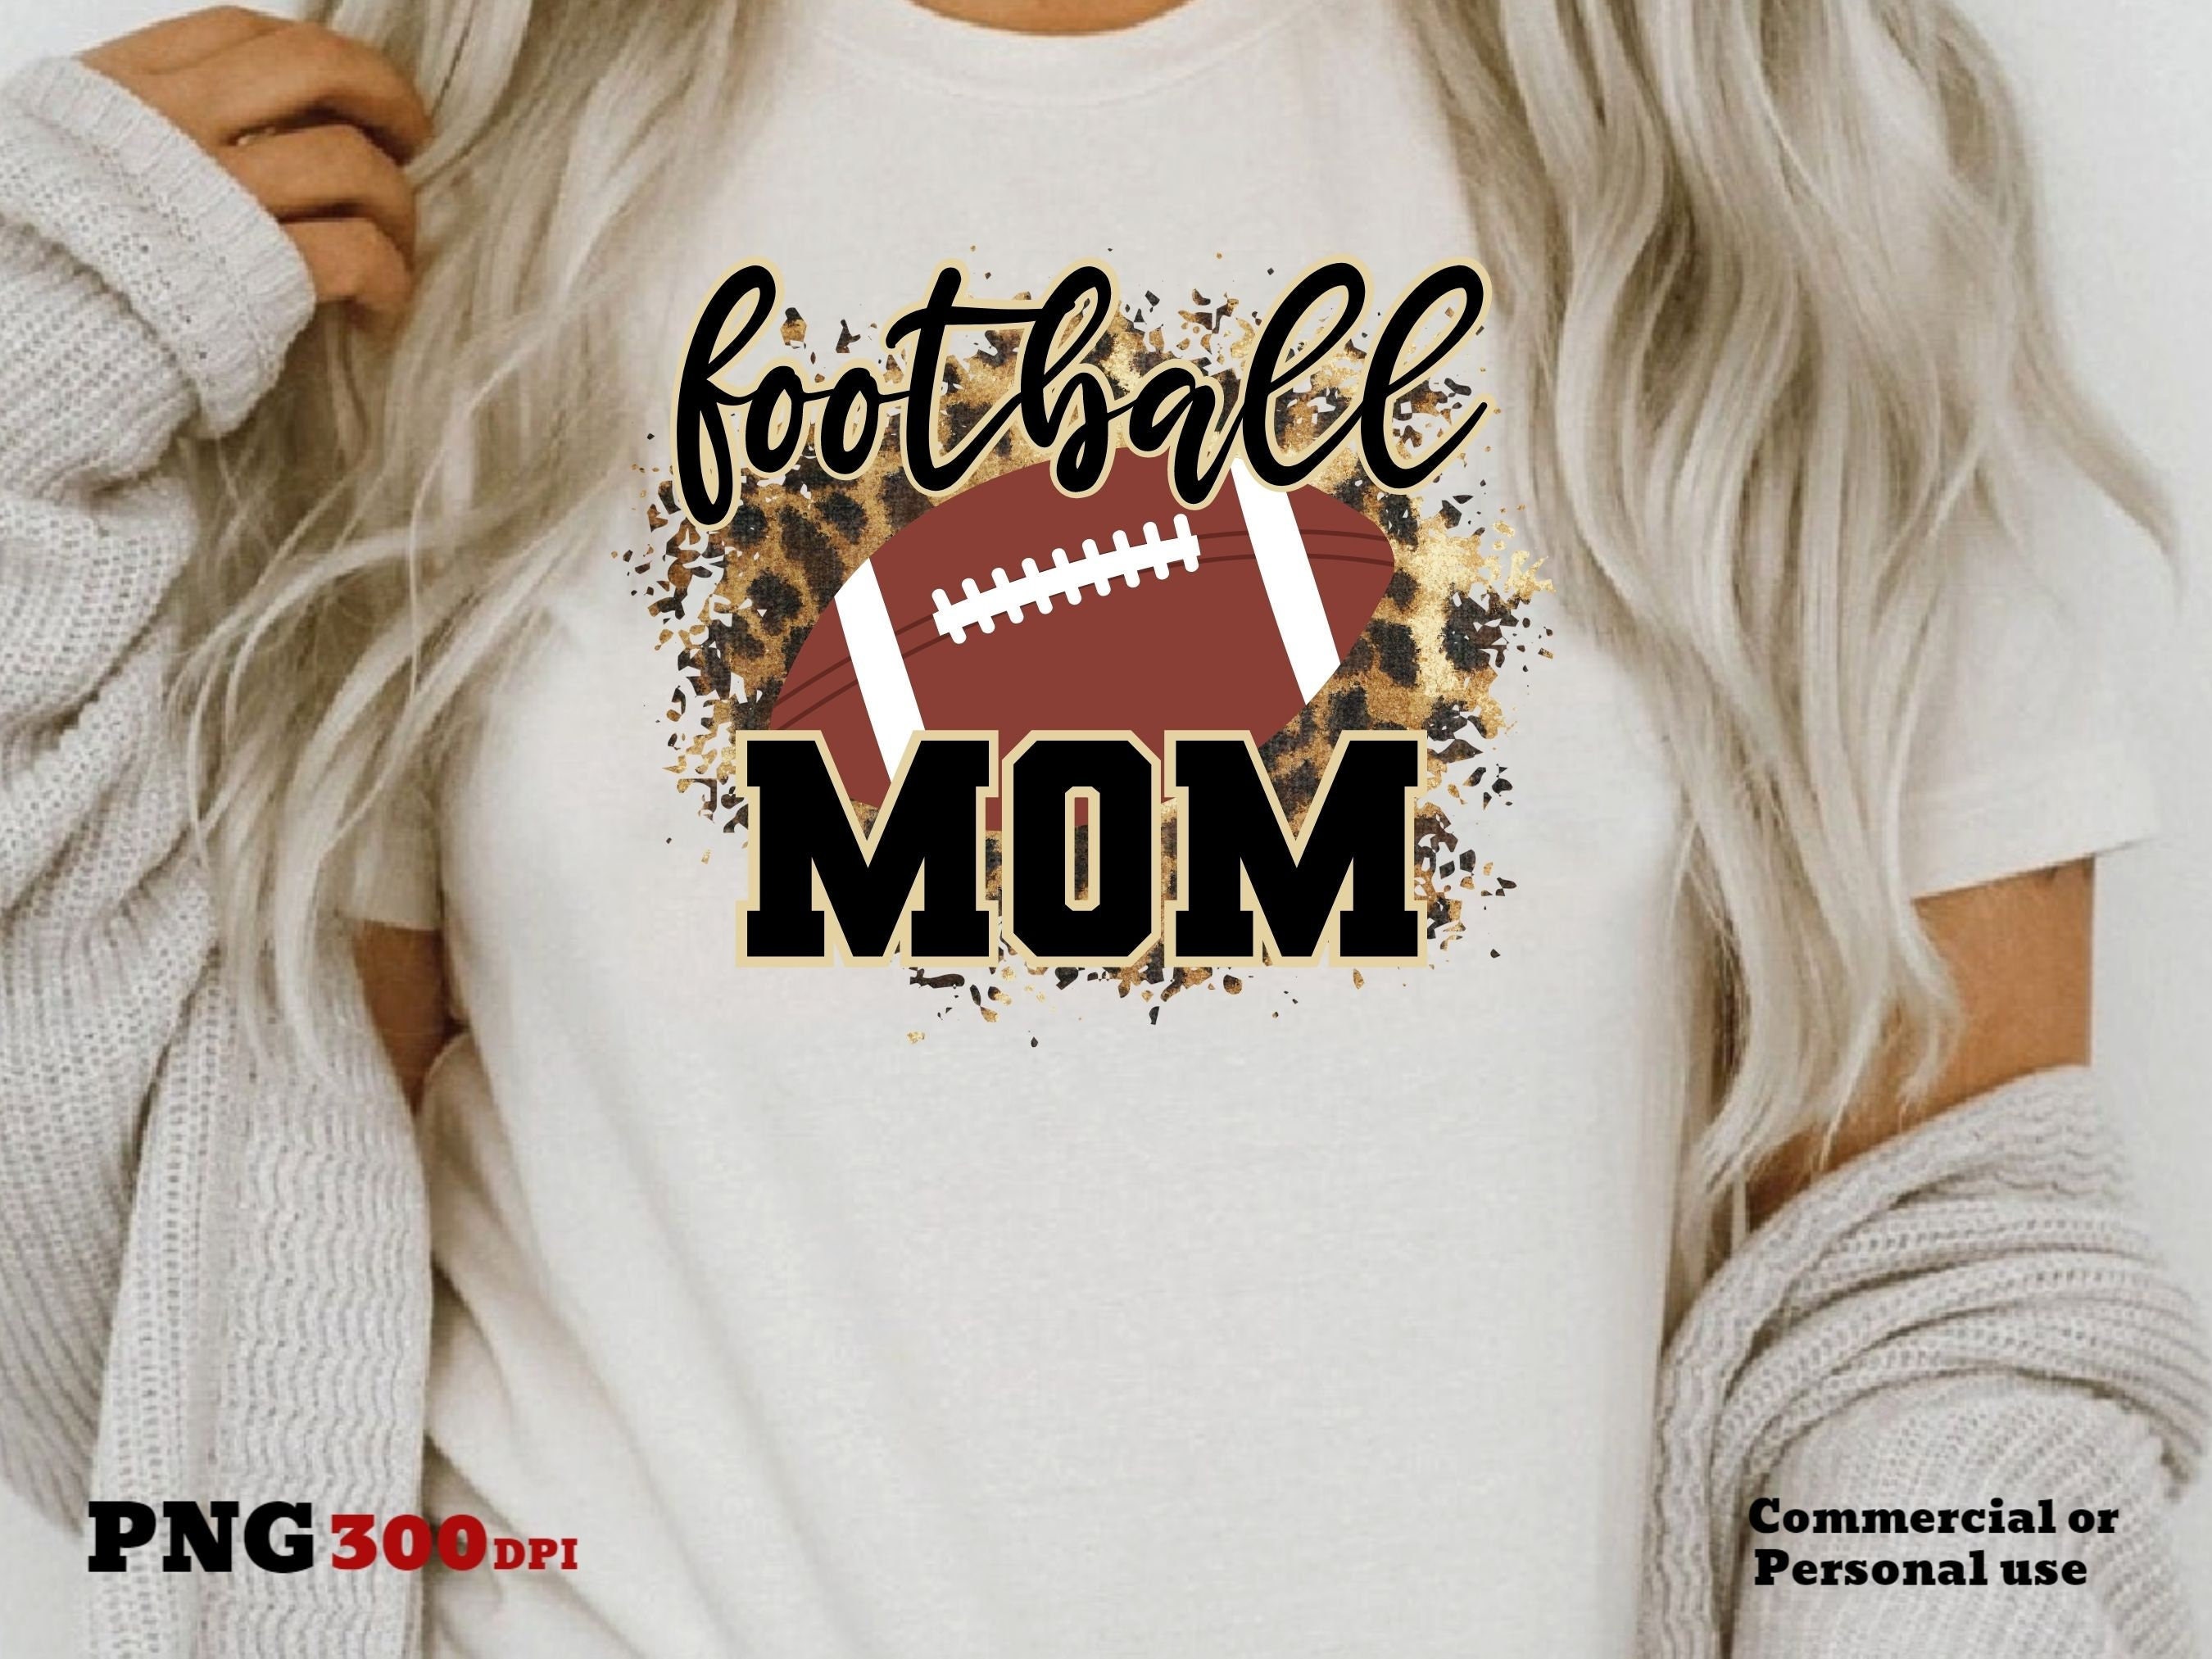 Football Mom PNG, Touchdown, Sports Sweatshirt, Leopard Game Shirt File Etsy Print, Sublimation Day, Download - PNG Mom, Mama, Design Cheetah